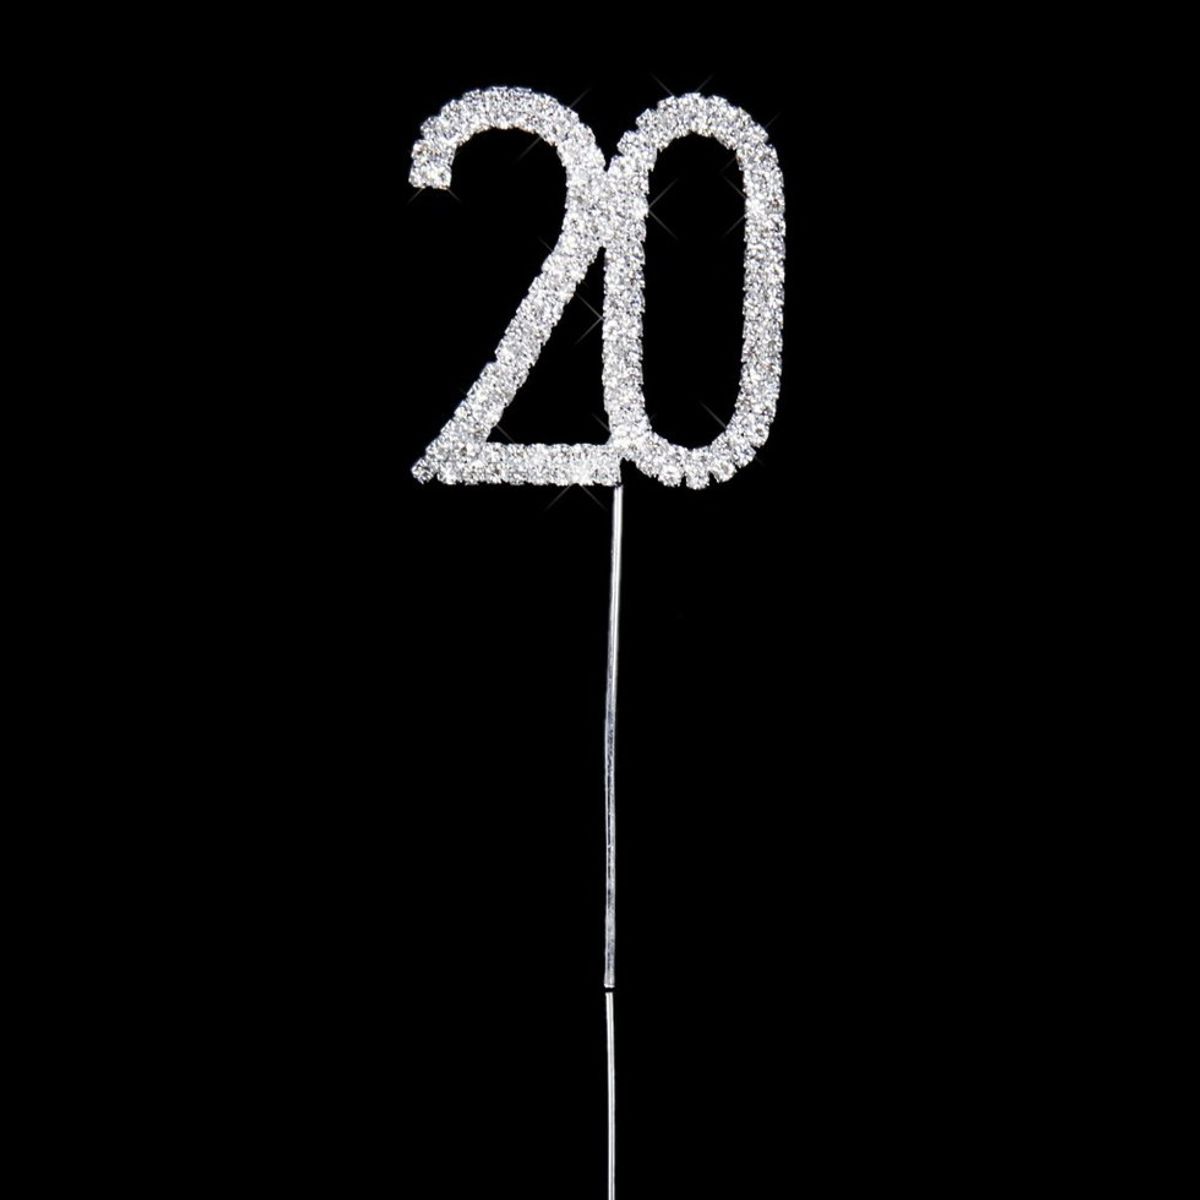 20 Things I've Learned The Past 20 Years